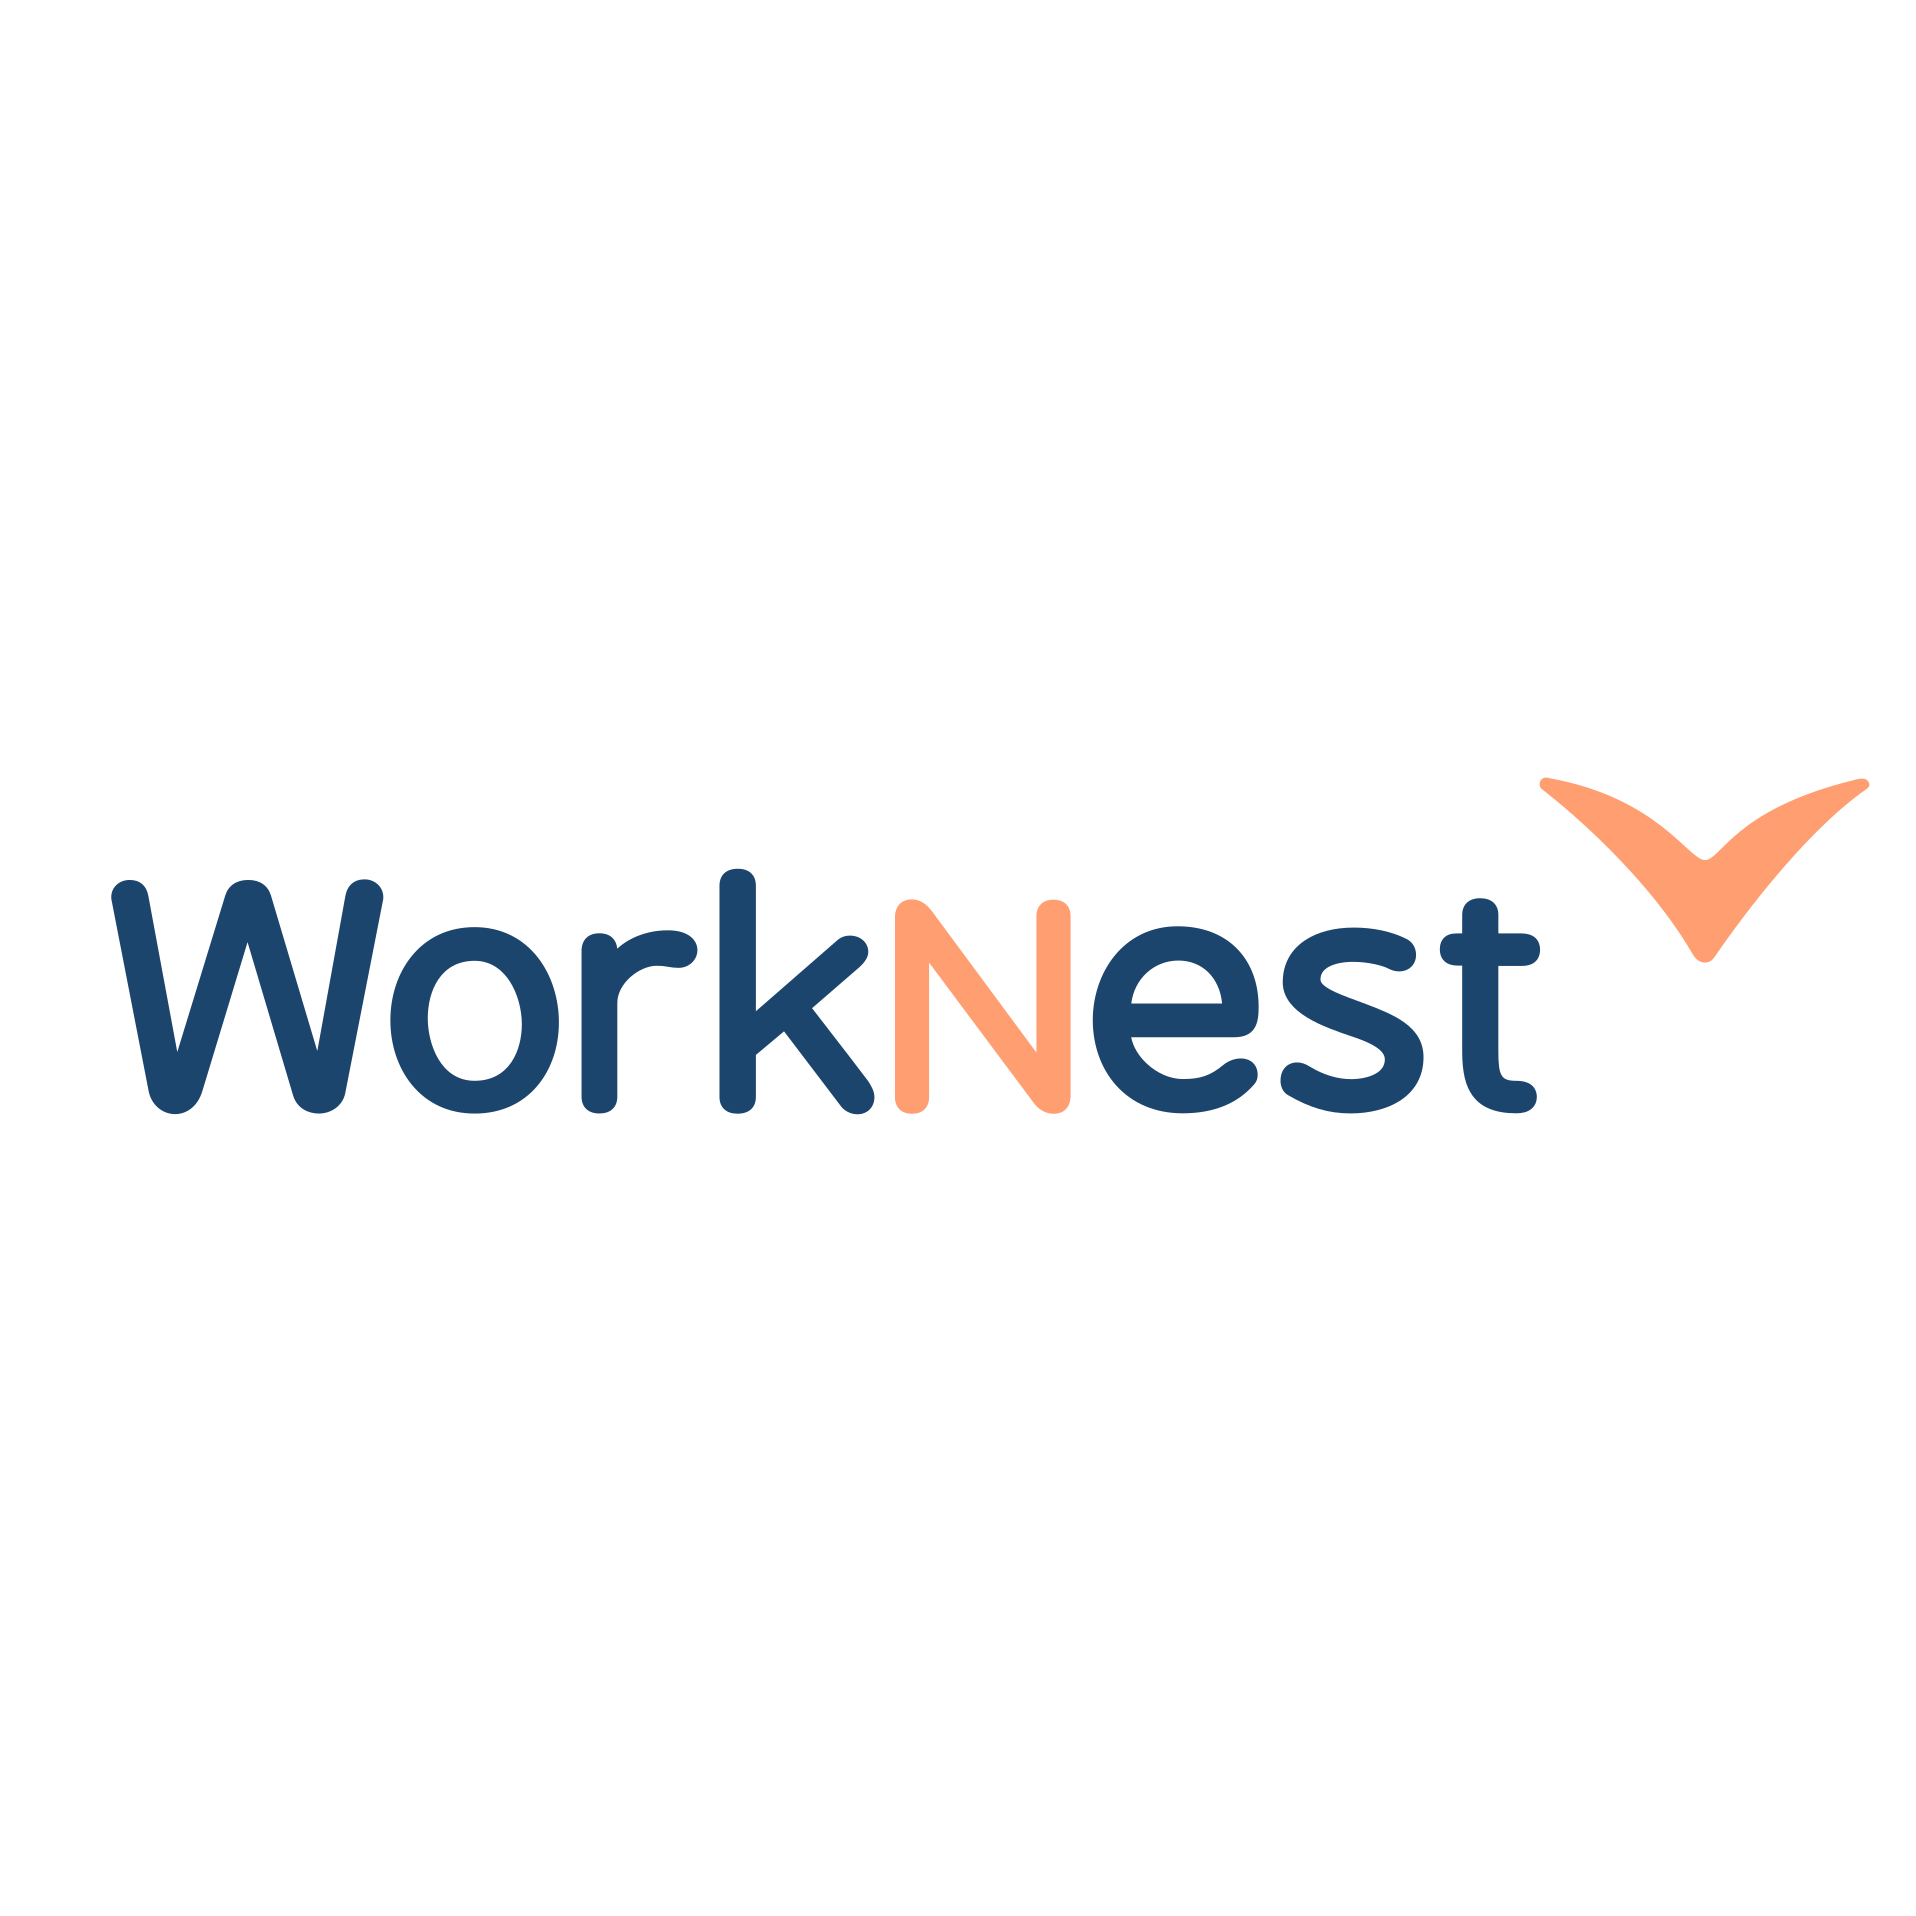 WorkNest